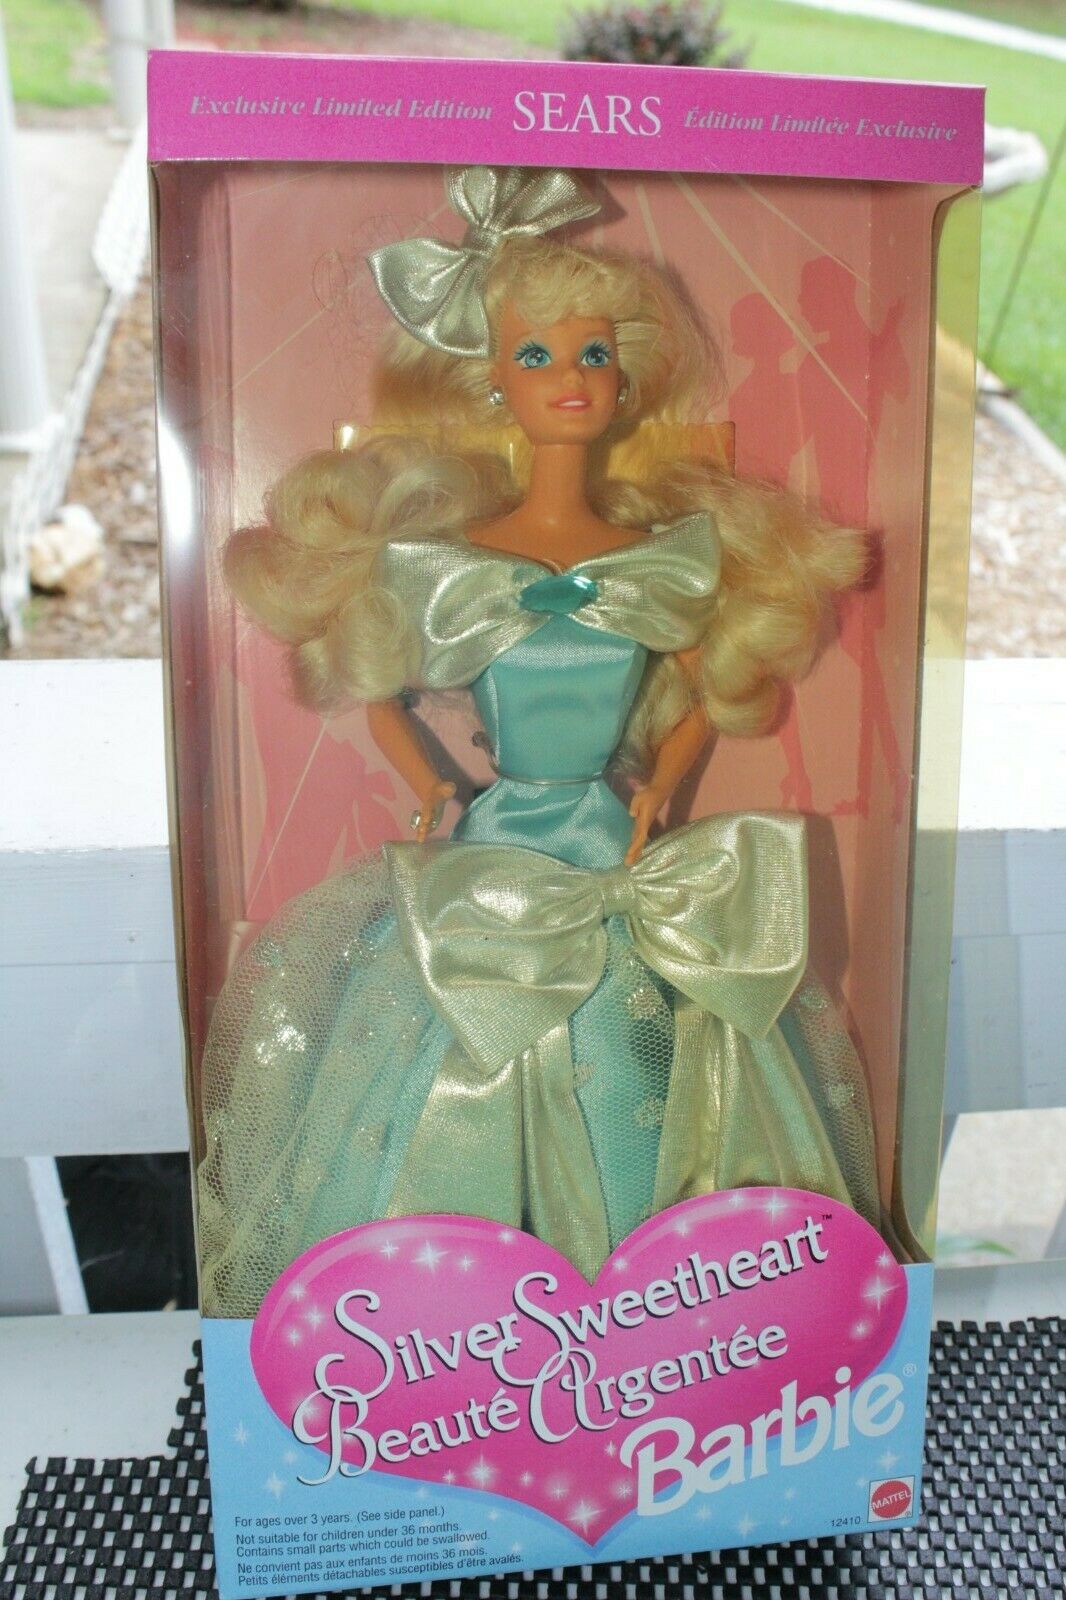 1994 SILVER SWEETHEART SEARS EXCLUSIVE LIMITED EDITION BARBIE #12410 NRFB